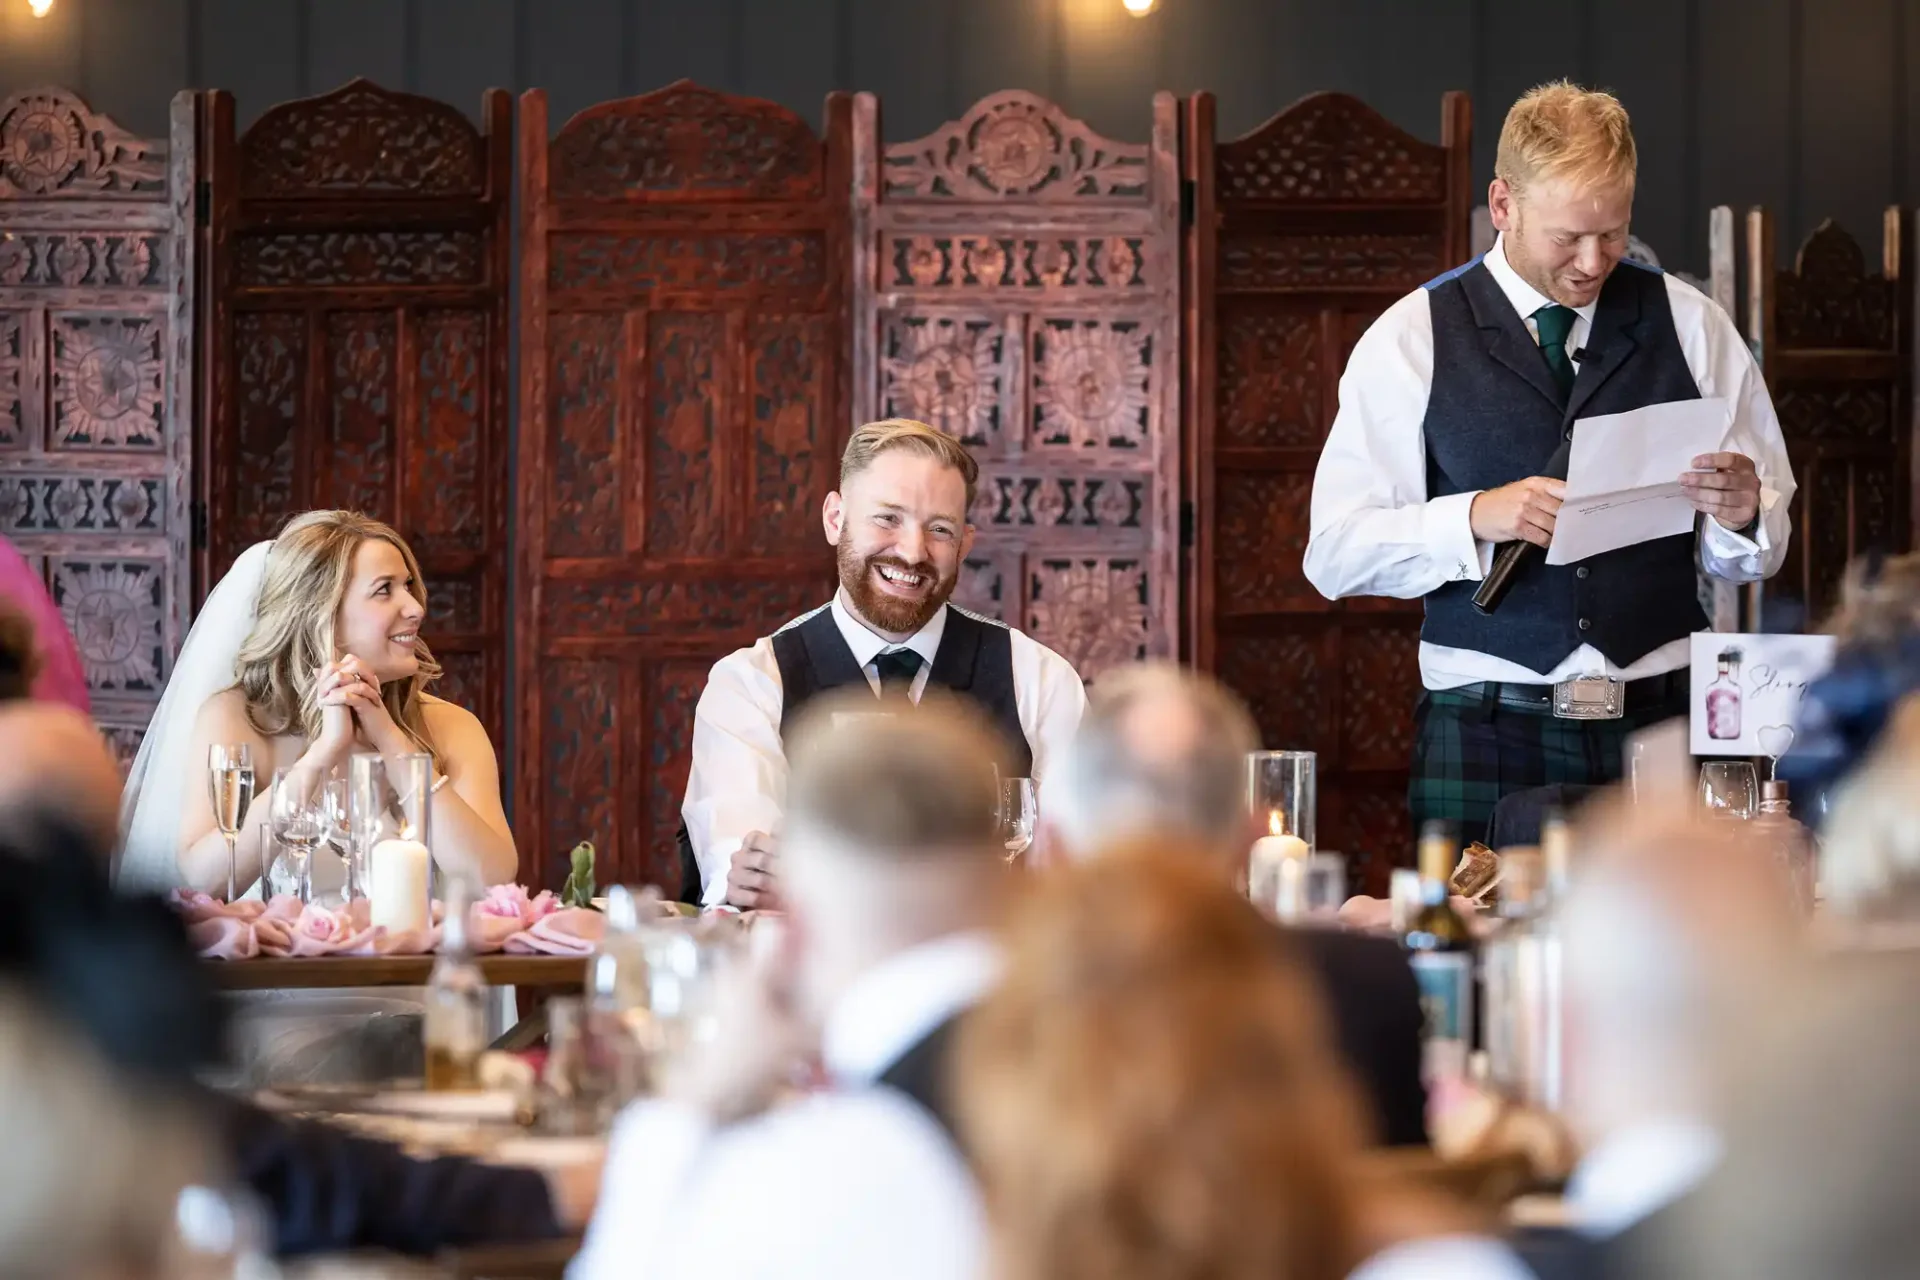 A man in a kilt delivers a speech at a wedding, with a smiling bride and groom seated at a table, surrounded by guests in a banquet hall.